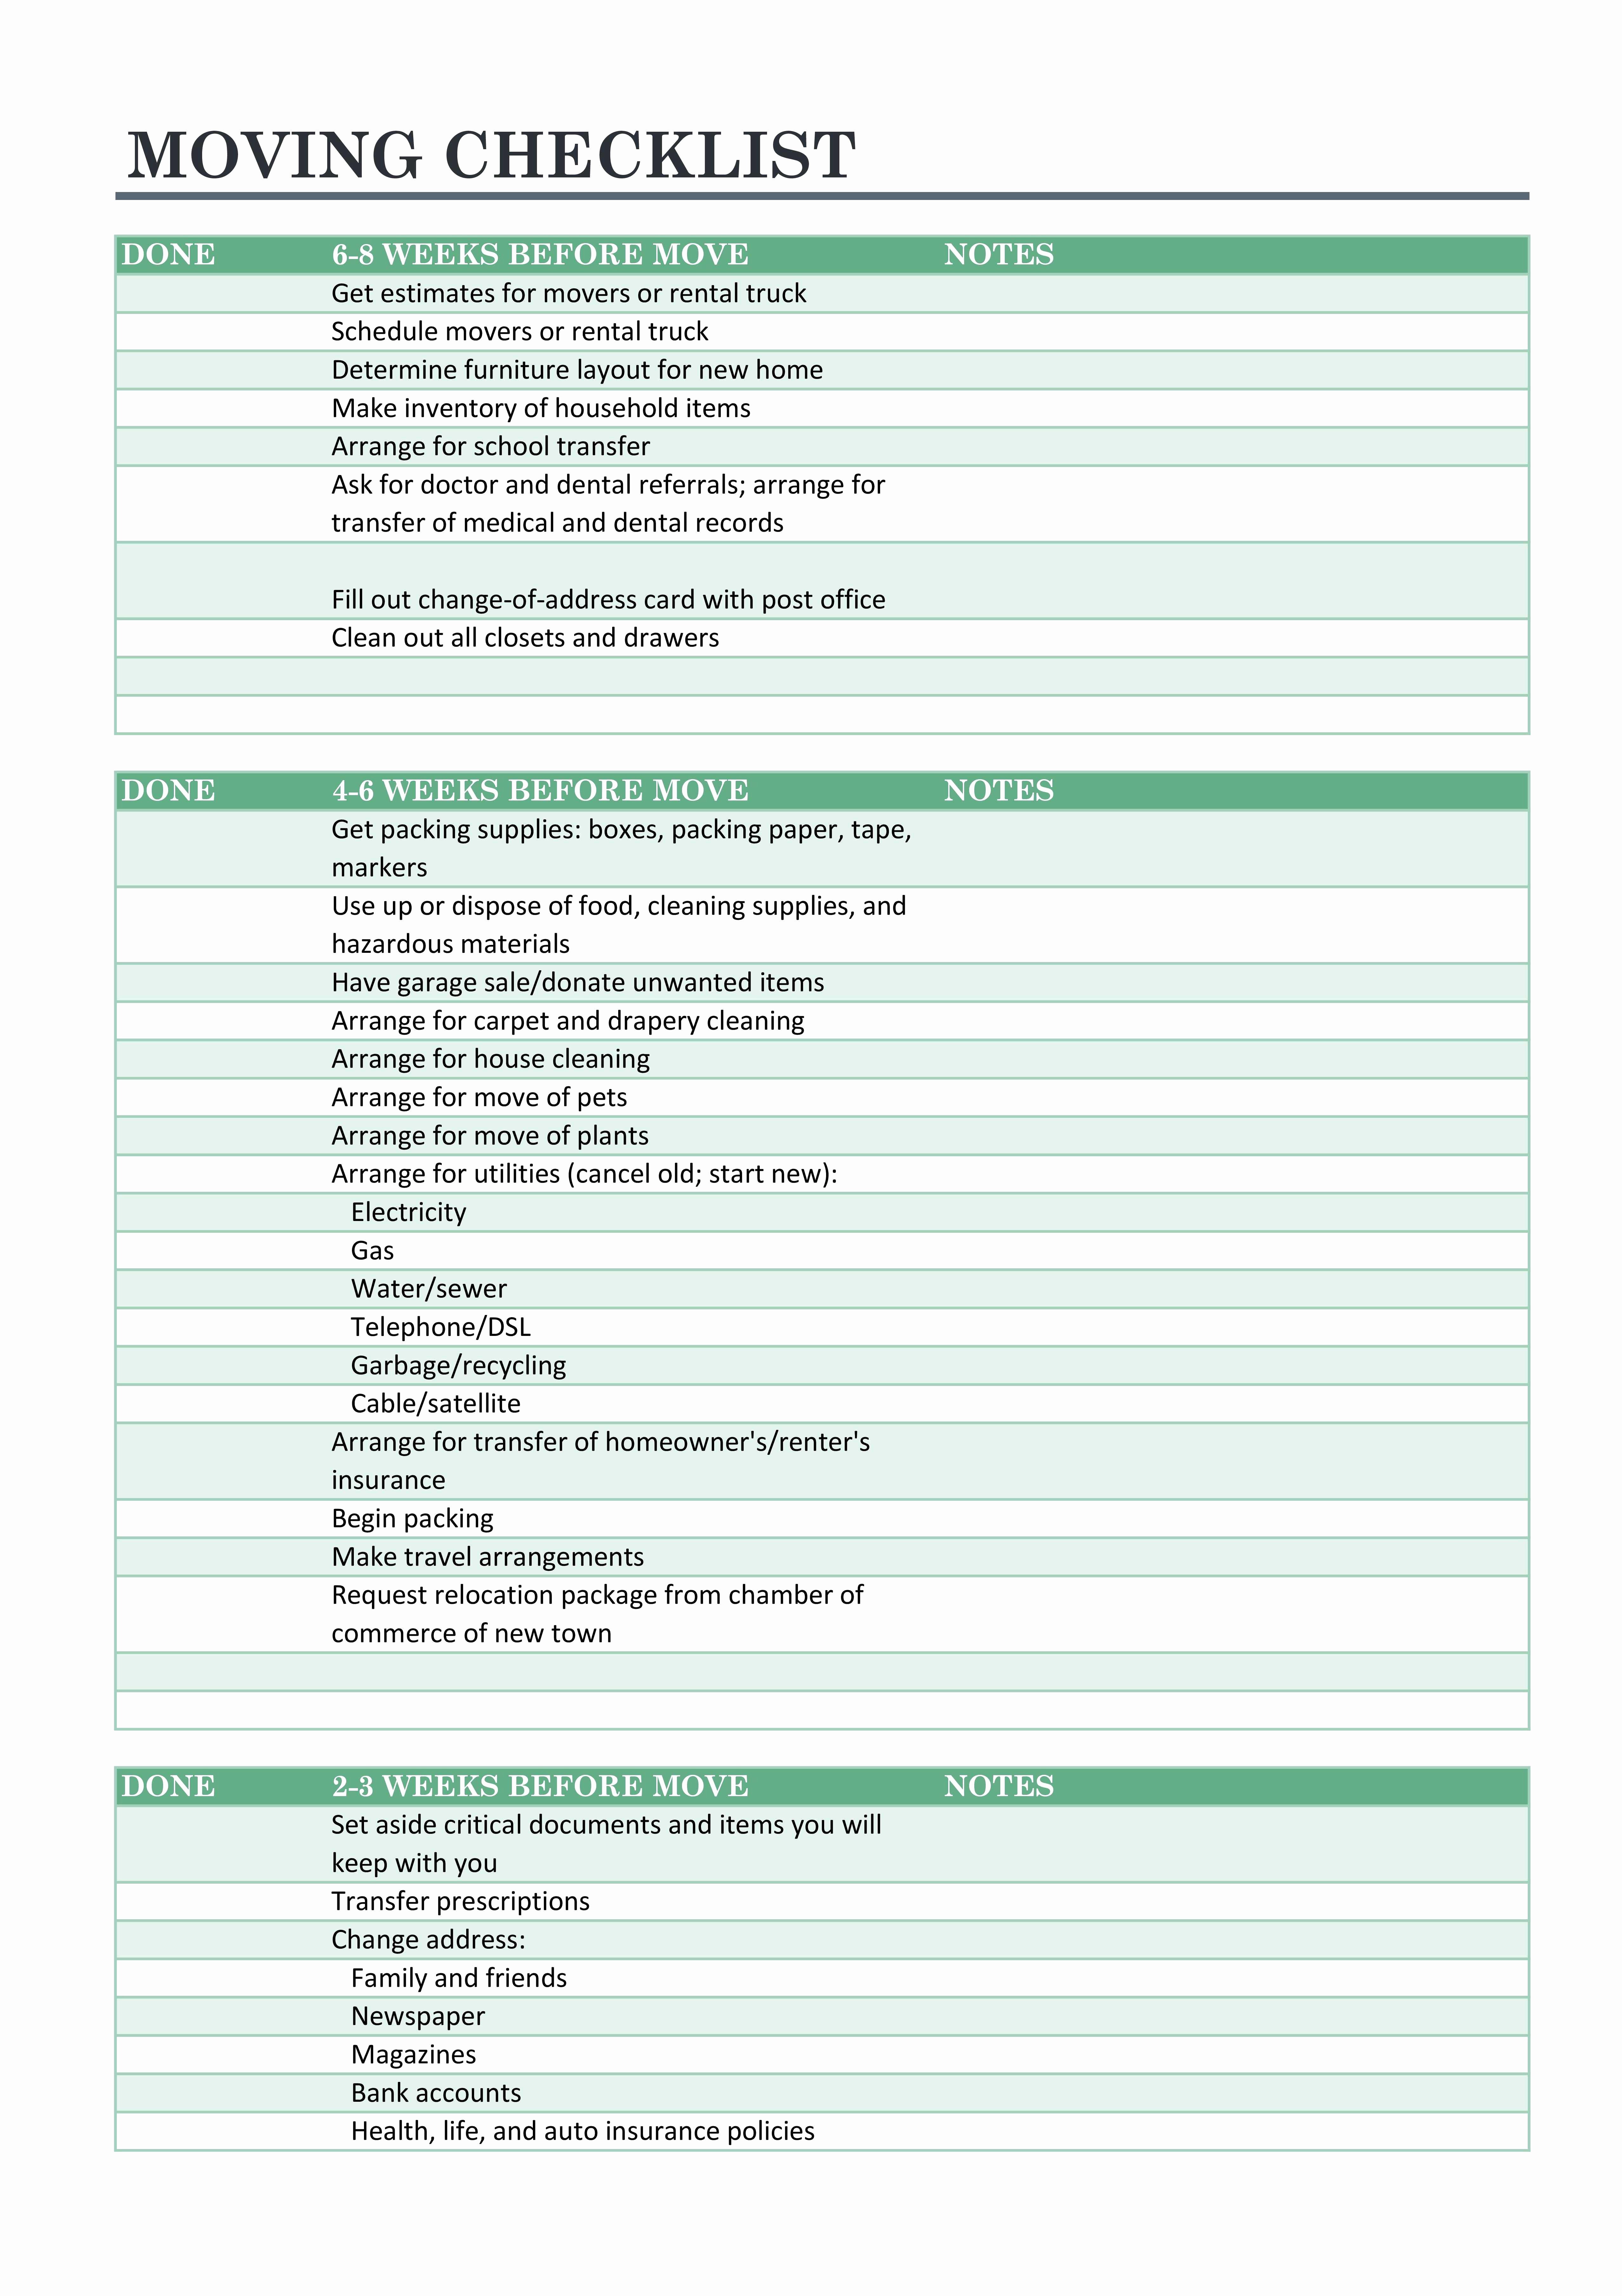 Business Moving Checklist Template Inspirational 45 Great Moving Checklists [checklist for Moving In Out